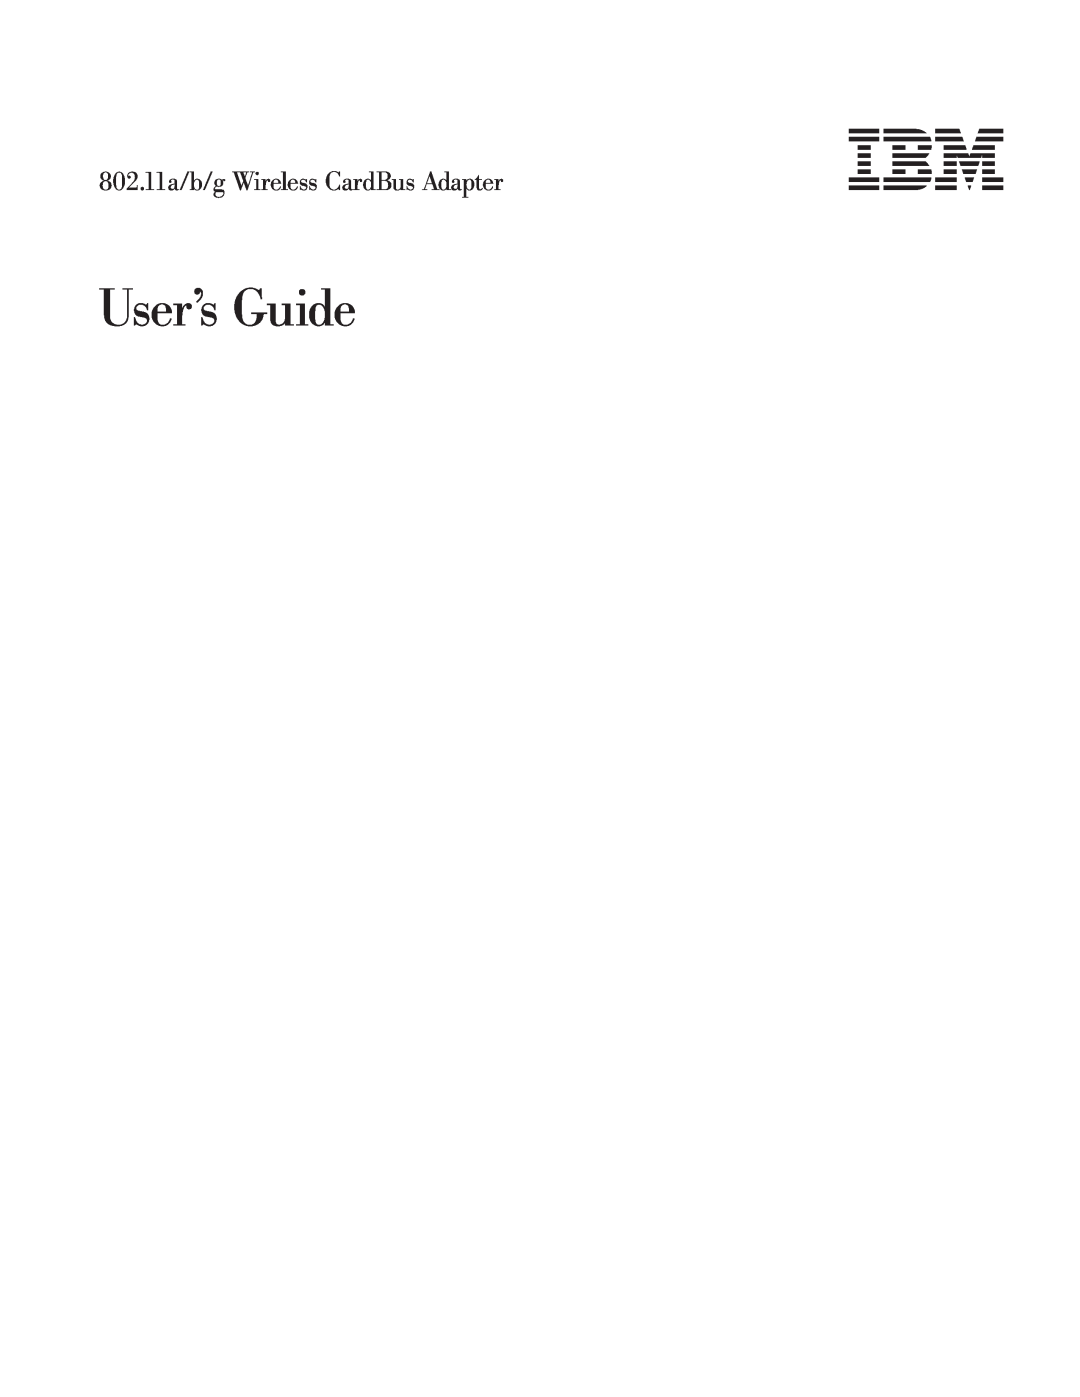 Trust Computer Products IBM 802.11a/b/g Wireless CardBus Adapter manual User’s Guide 